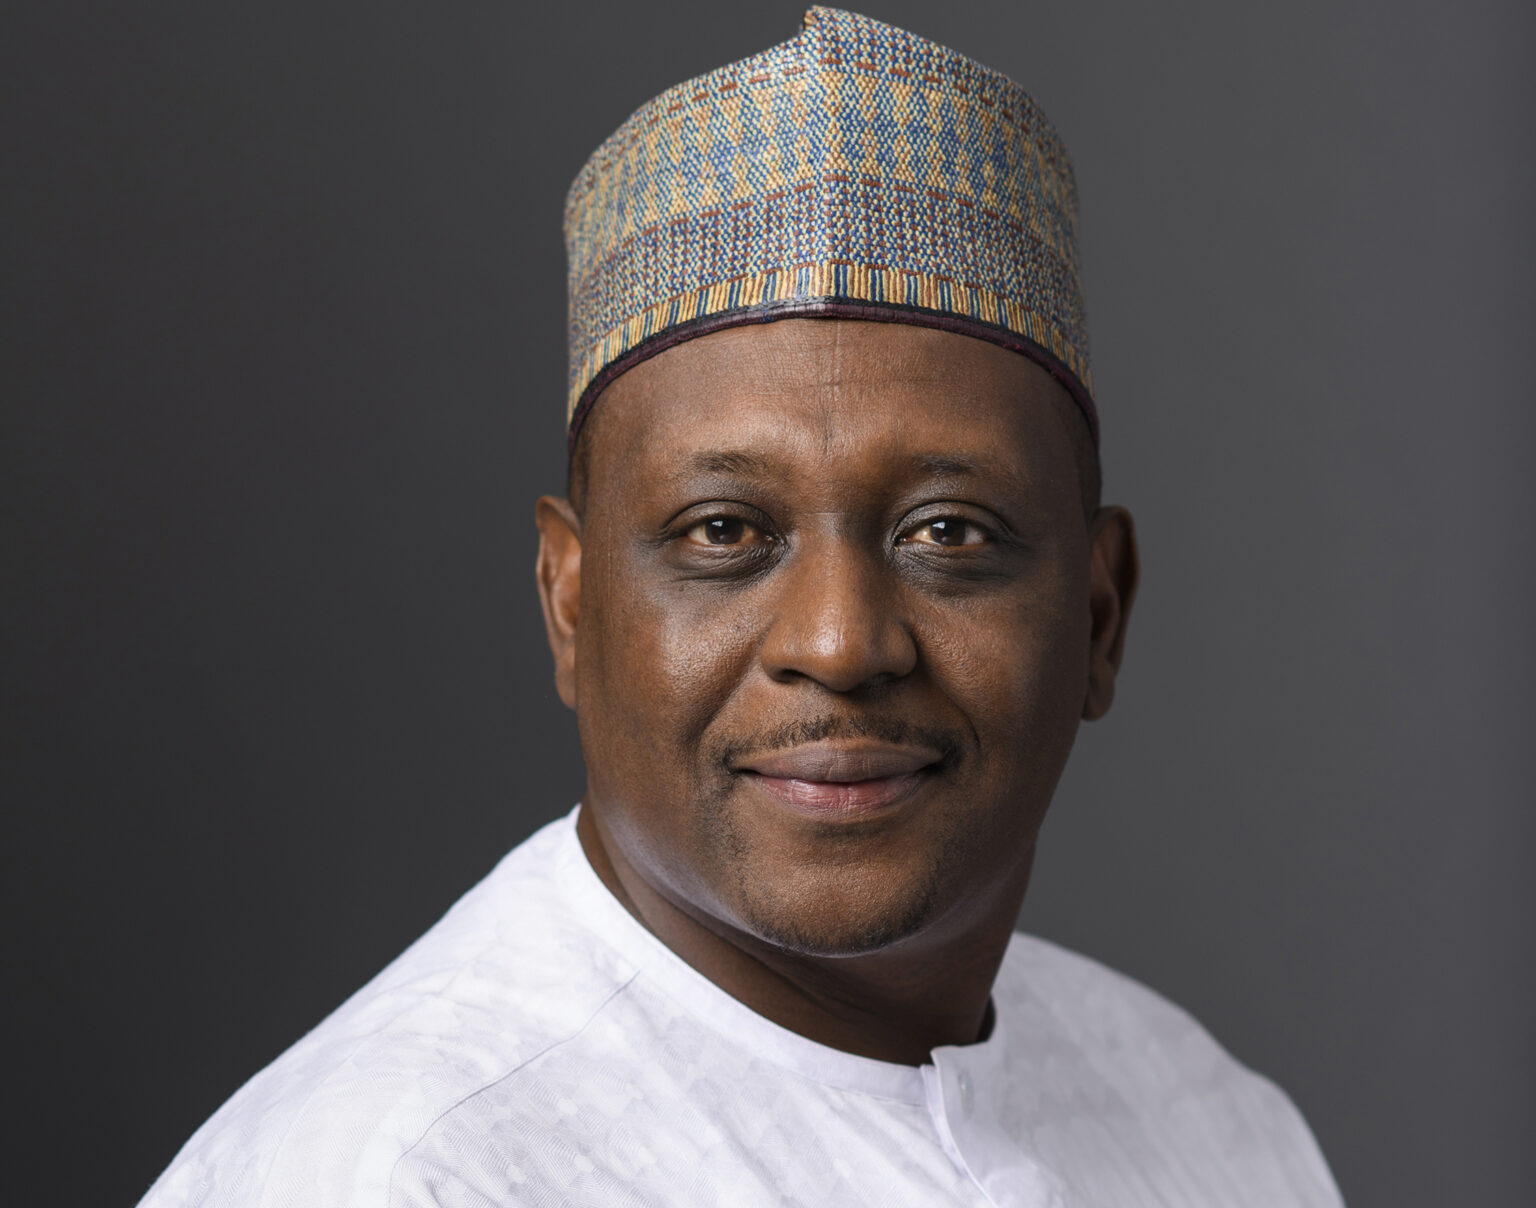 Nigeria’s former Minister of State for Health, Muhammad Pate